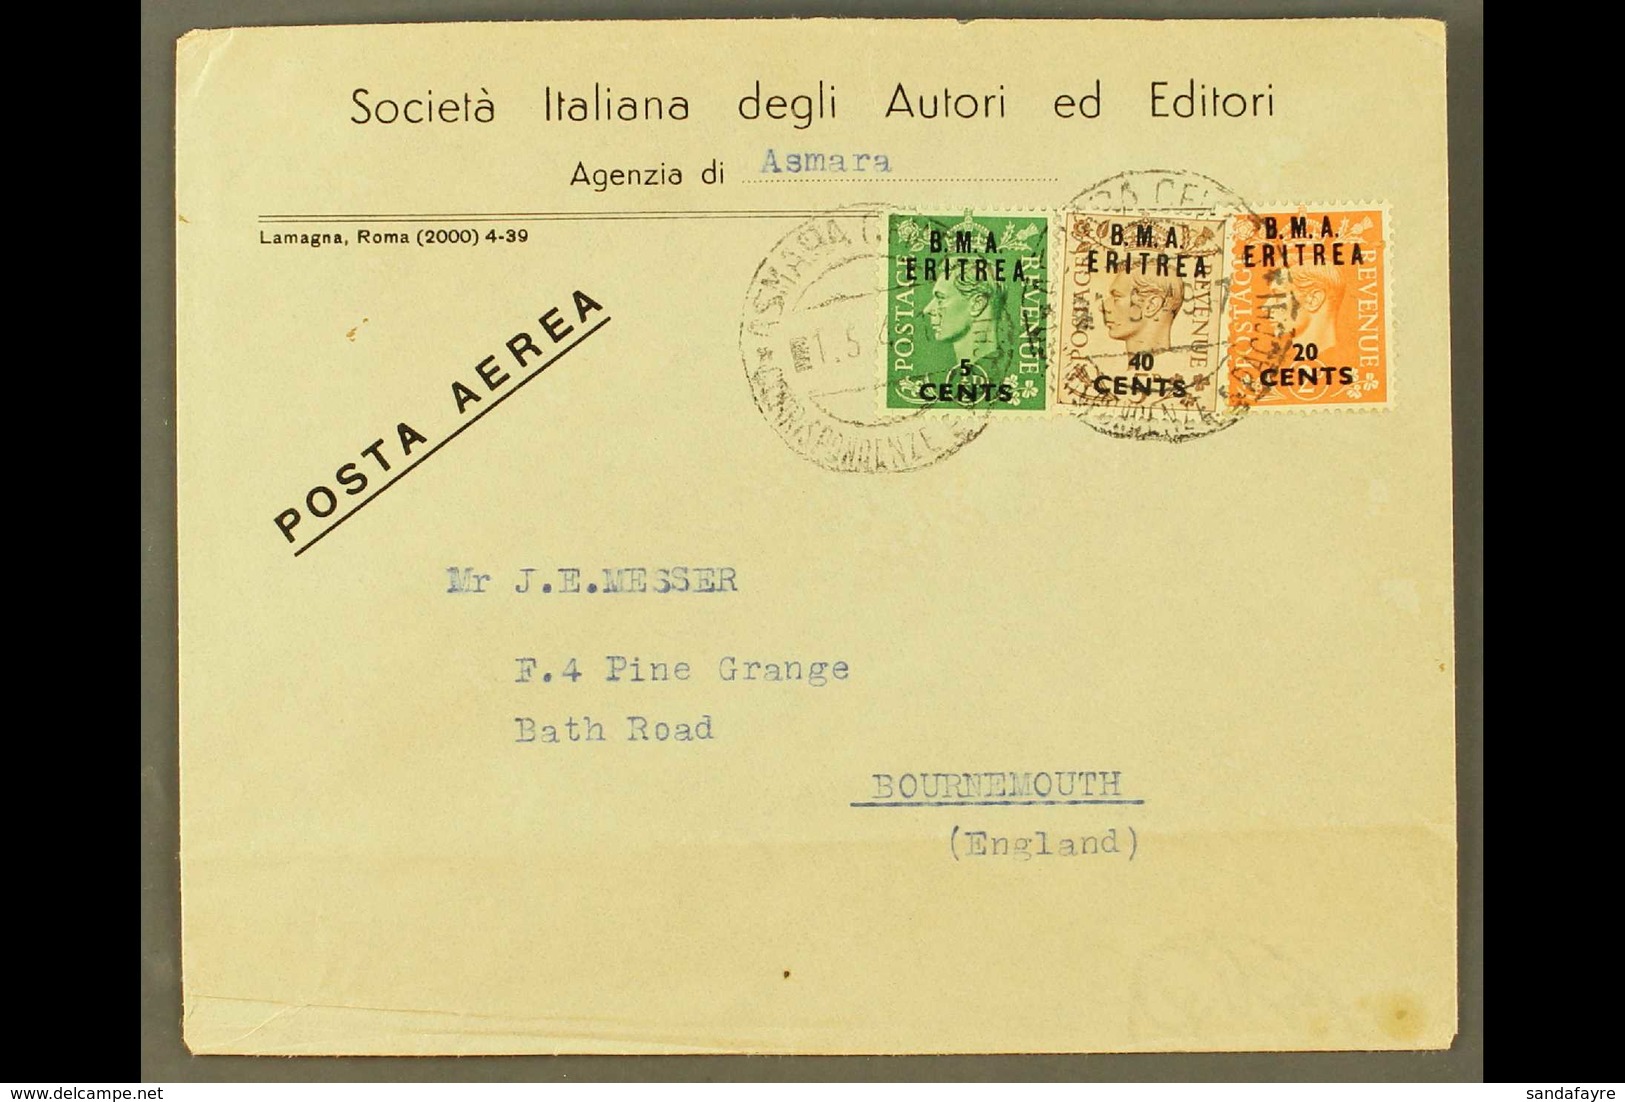 ERITREA 1949 (May) Printed Commercial Envelope To England, Bearing B.M.A. 5c On ½d, 20c On 2d And 40c On 5d, Tied Asmara - Italian Eastern Africa